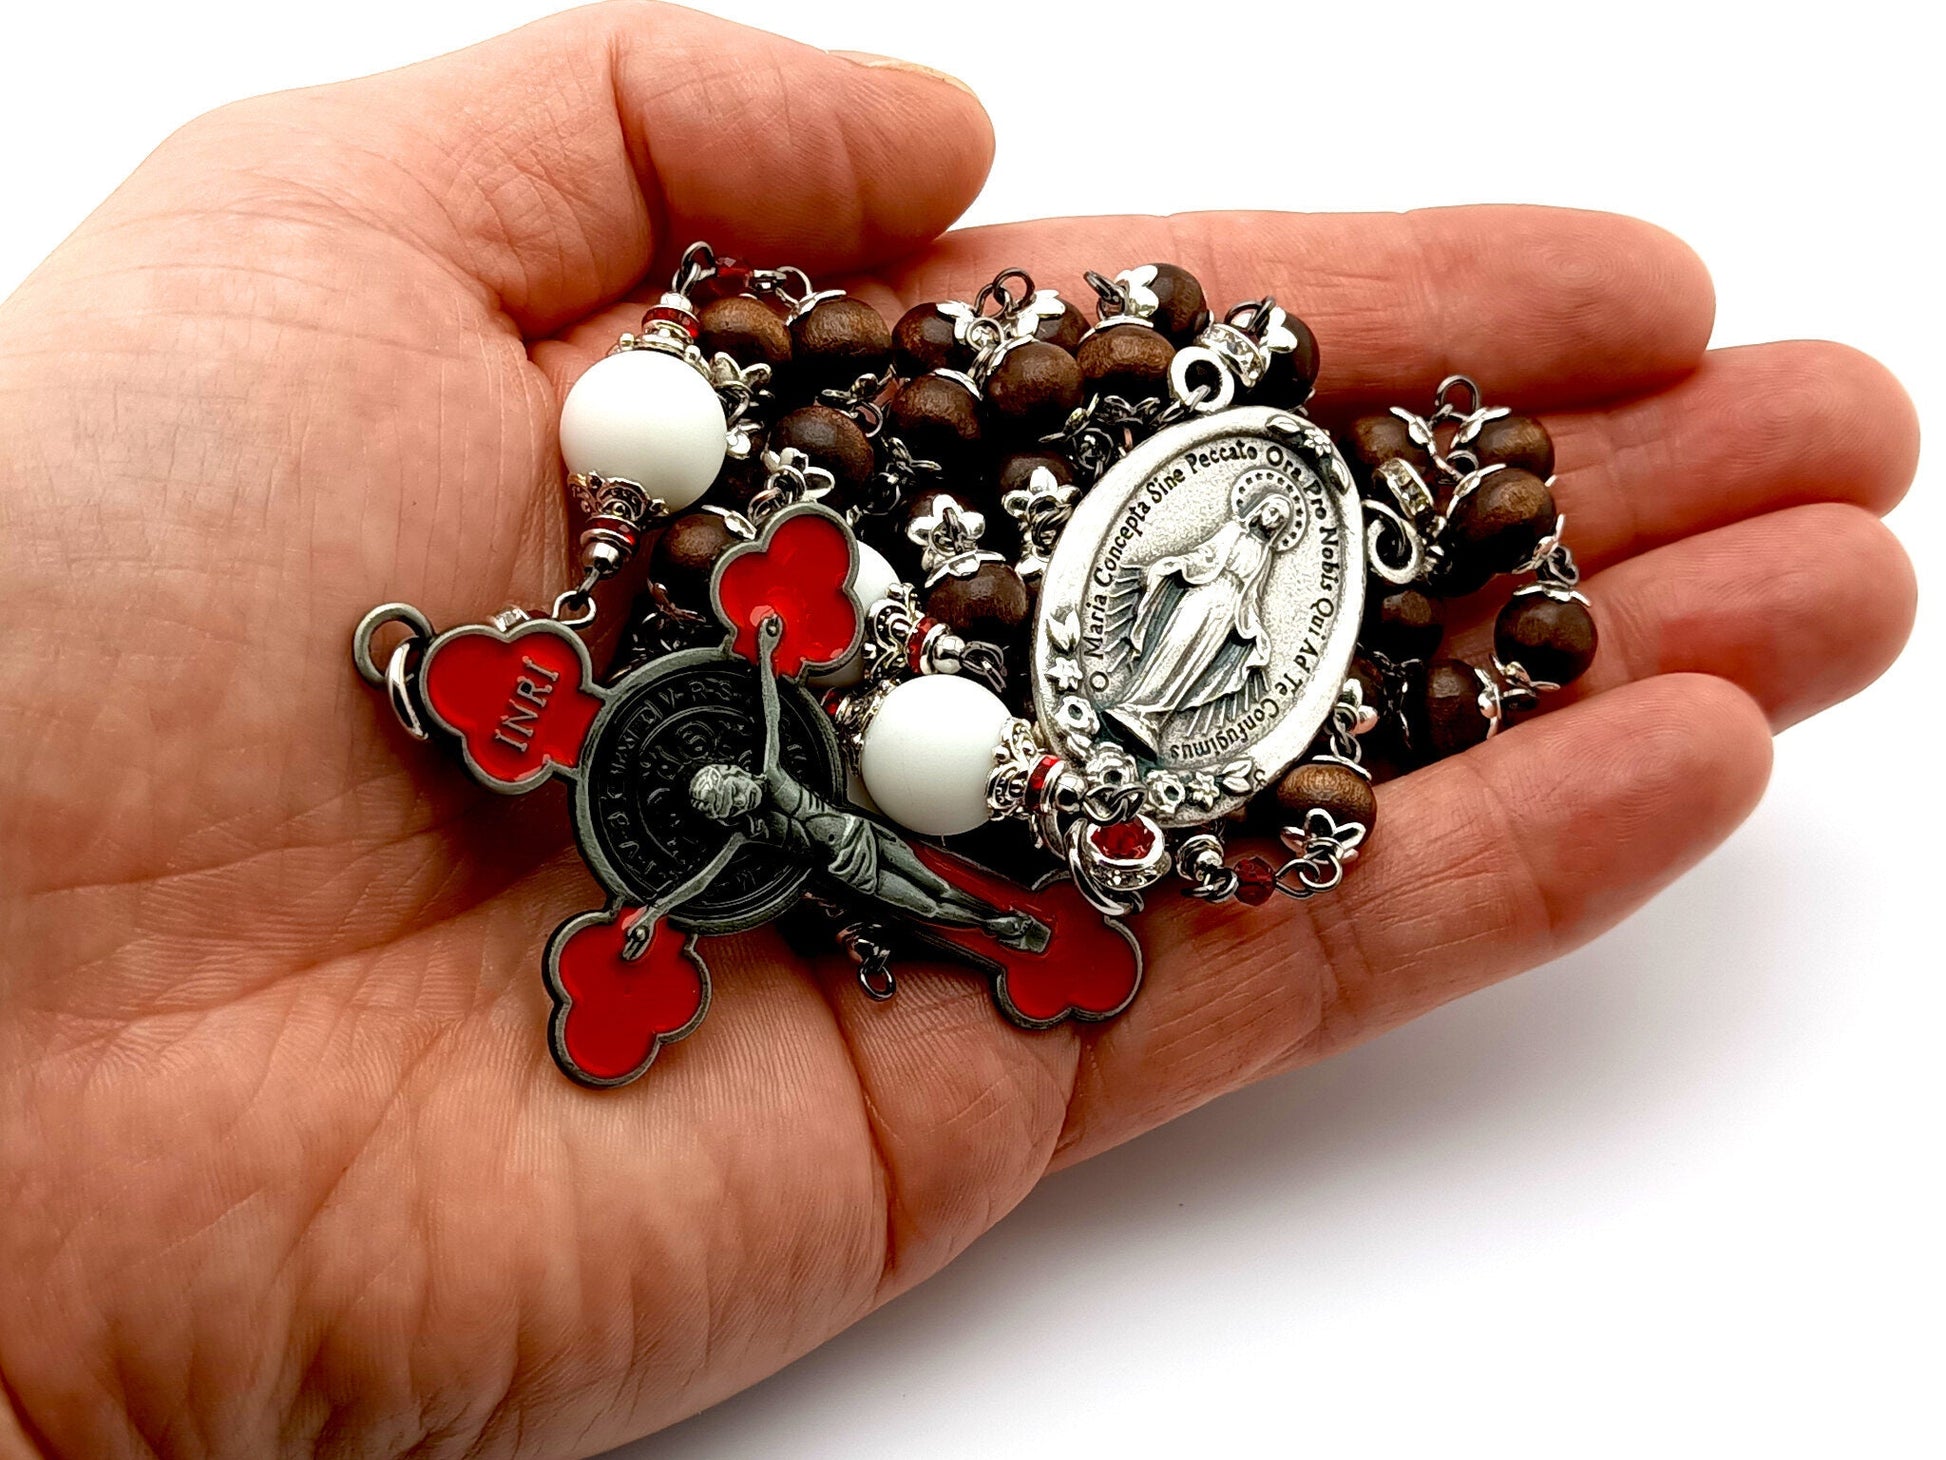 Miraculous medal unique rosary beads with wood and alabaster gemstone beads and red enamel Saint Benedict crucifix.